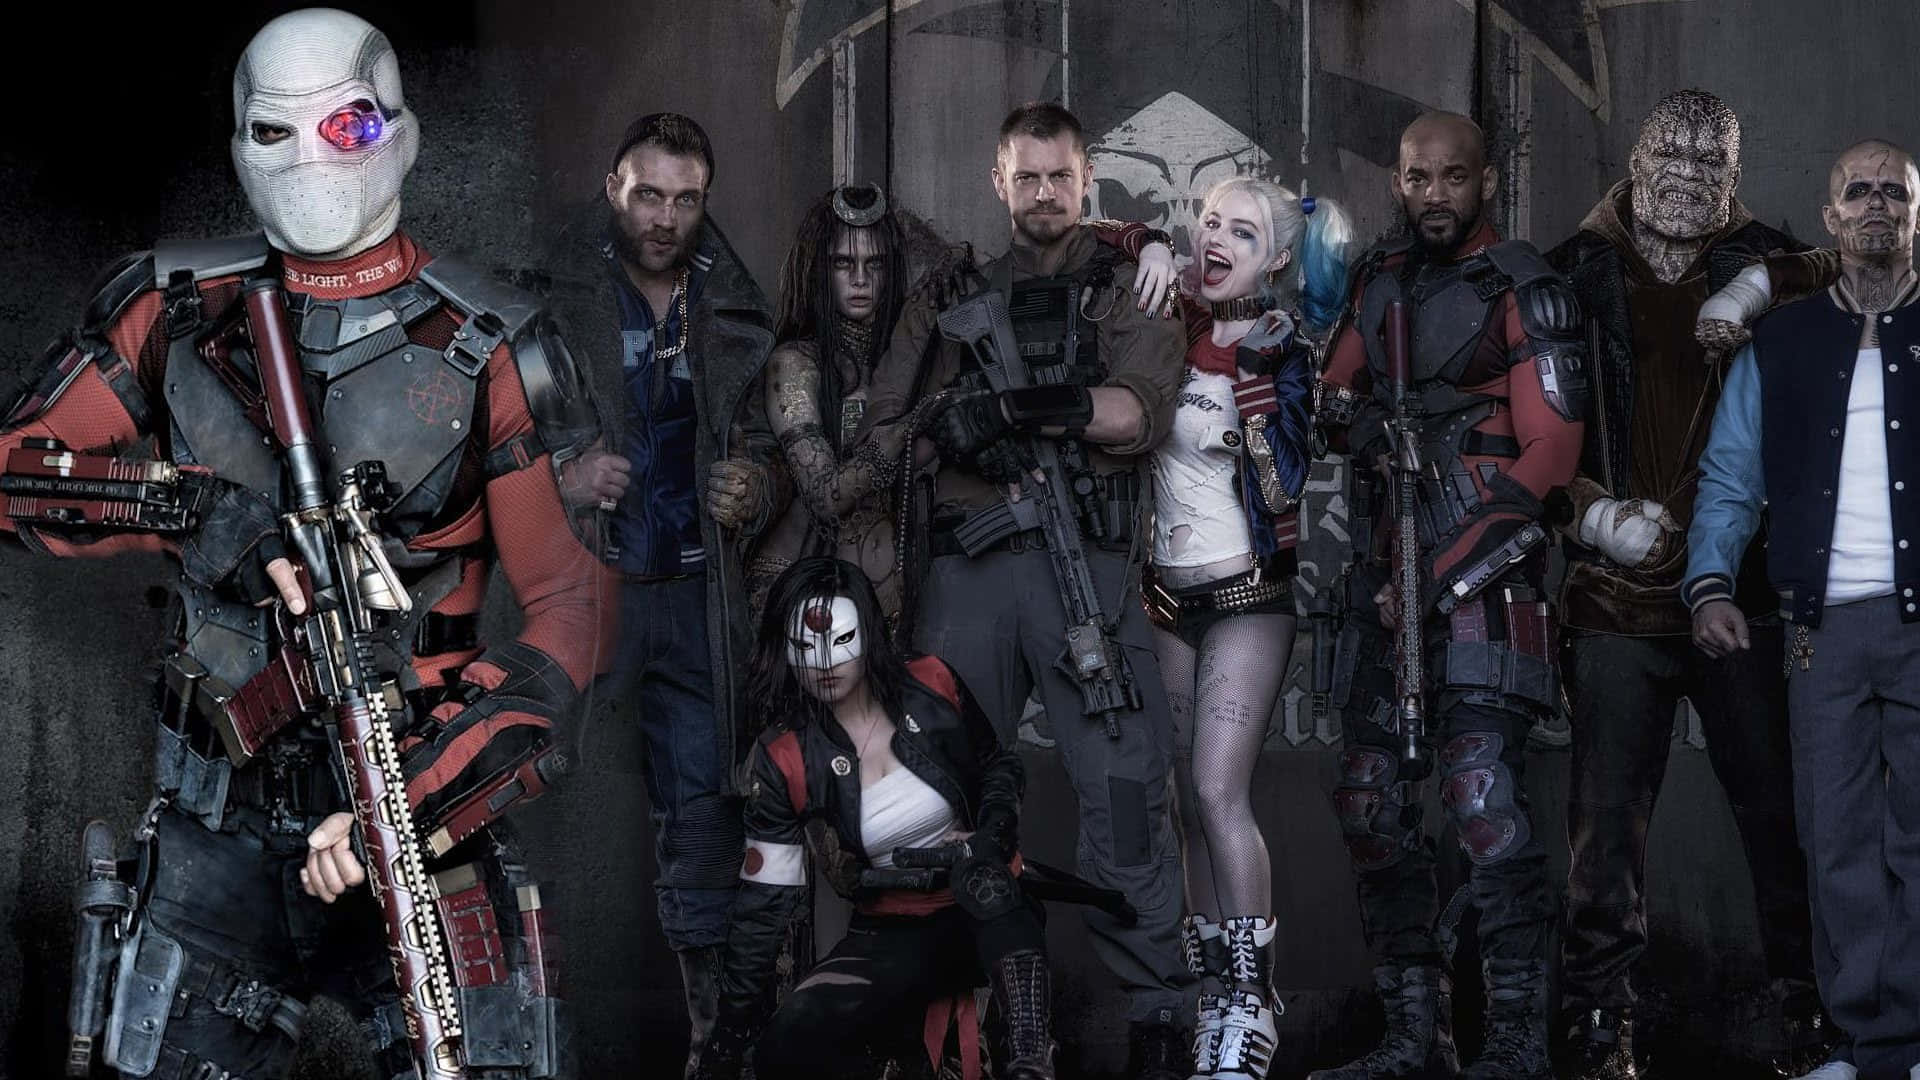 Margot Robbie as Harley Quinn in Suicide Squad Wallpaper